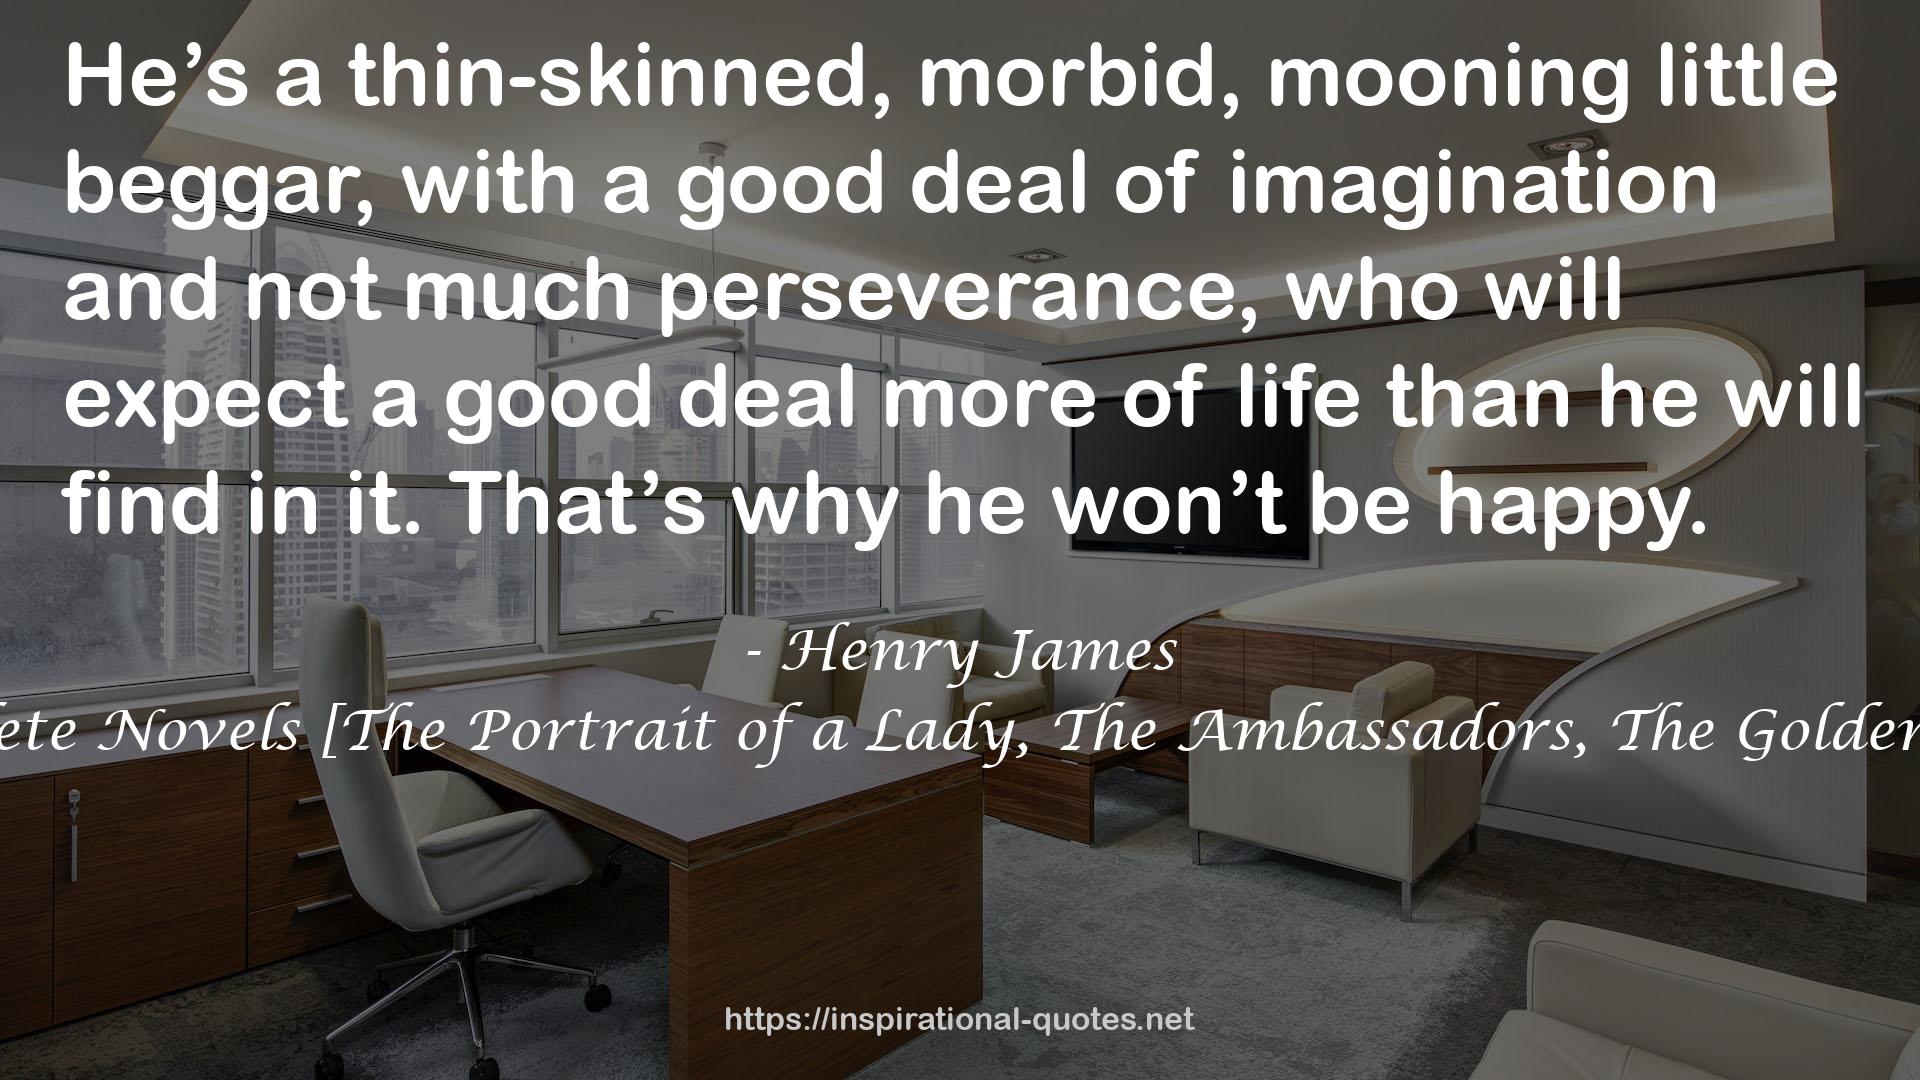 Henry James: The Complete Novels [The Portrait of a Lady, The Ambassadors, The Golden Bowl, etc.] (Book House) QUOTES